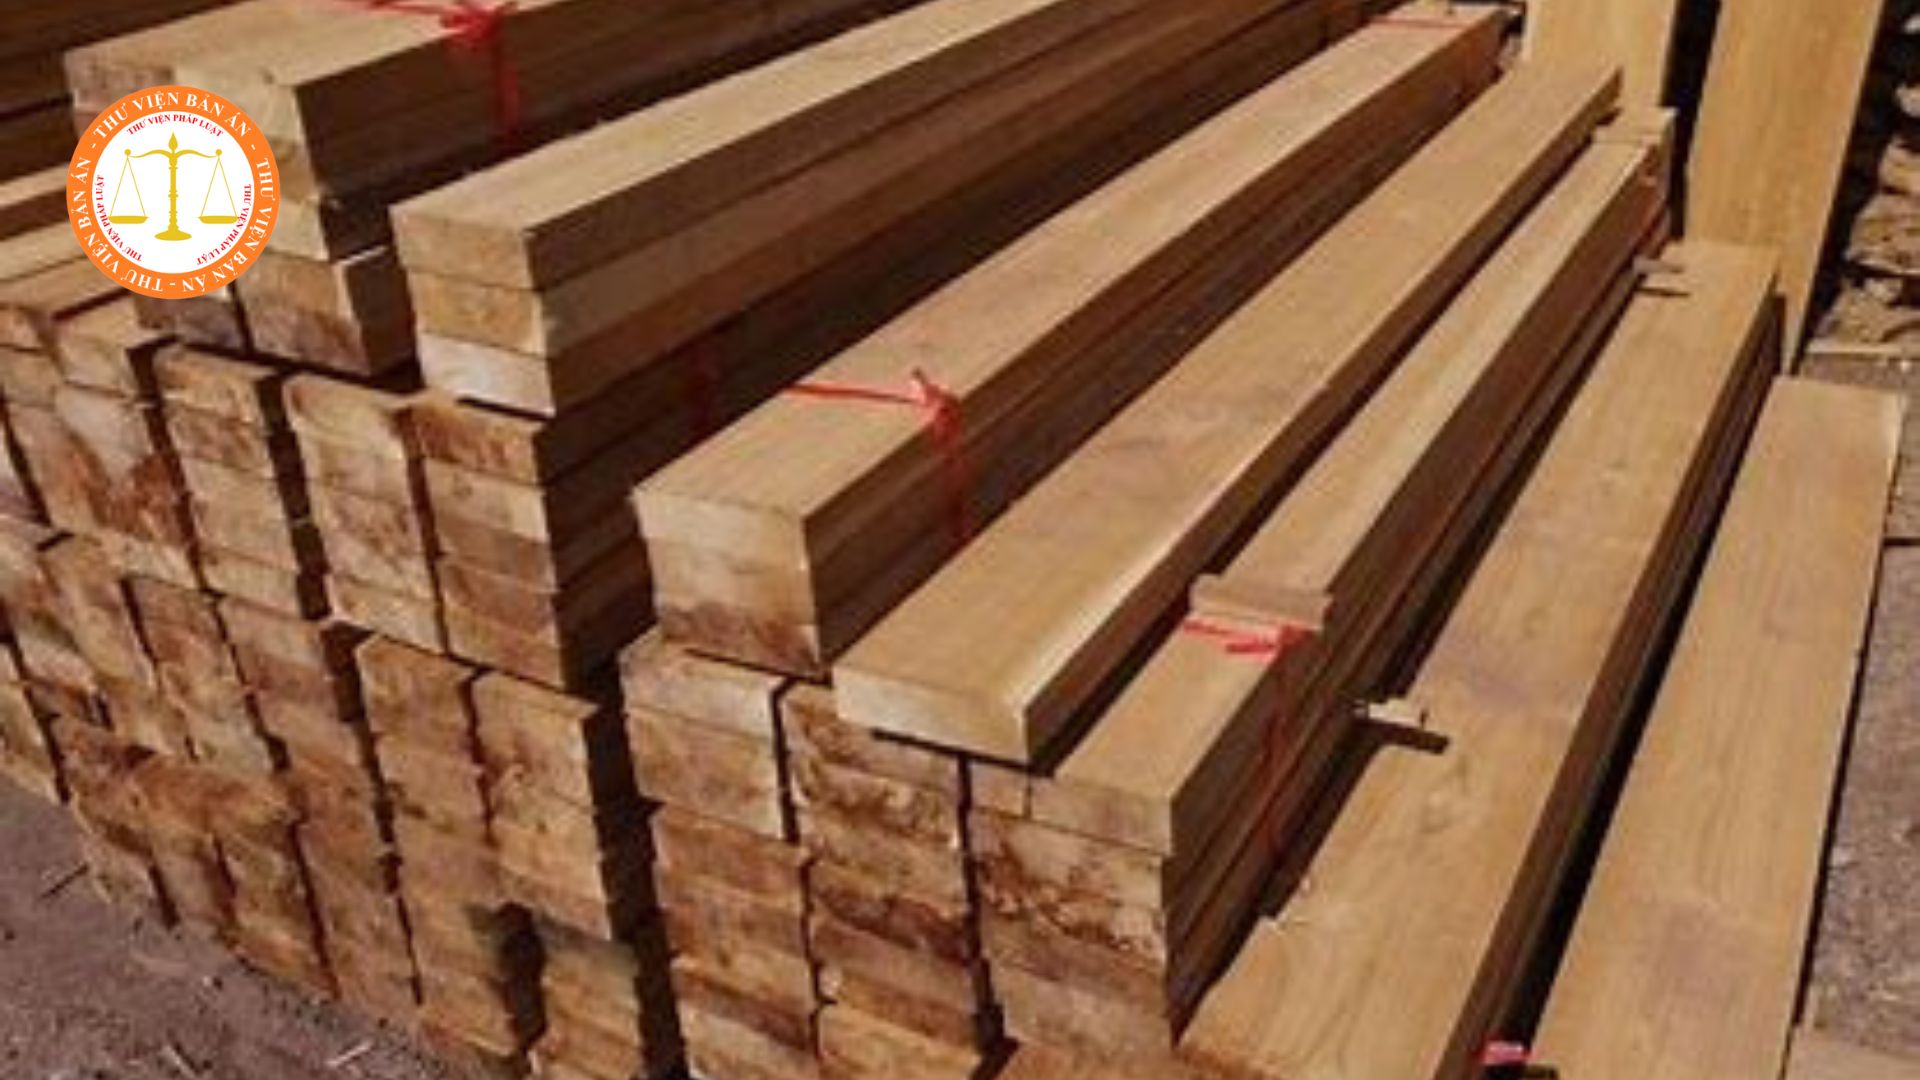 Non-structural timber grading requirements under the law in Vietnam